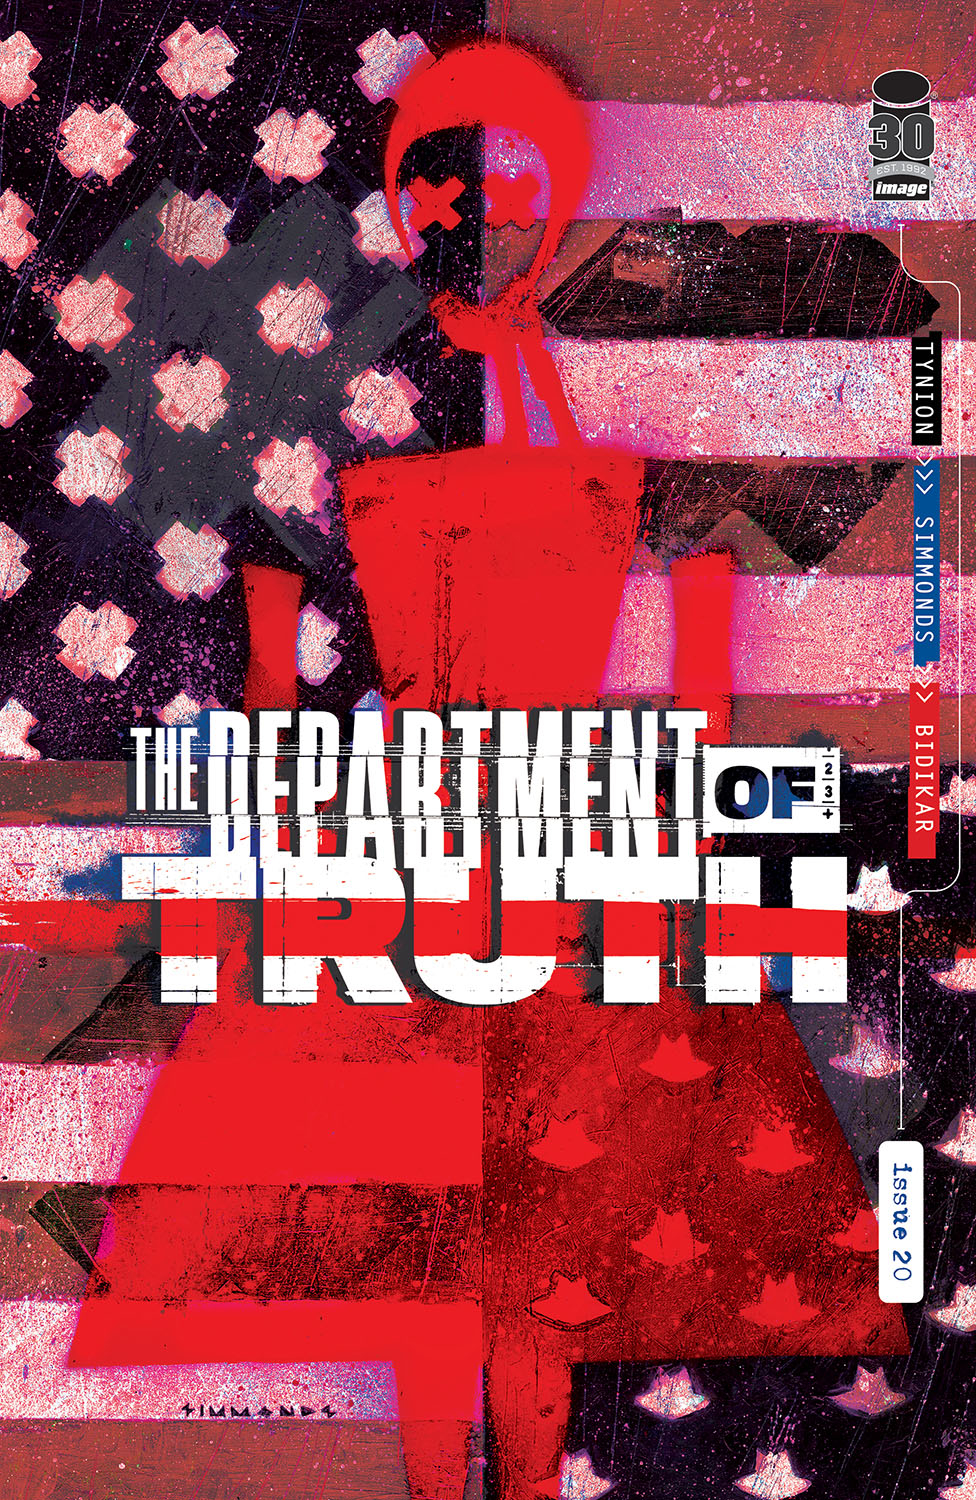 Department of Truth #20 Cover C 1 for 50 Incentive Simmonds (Mature)